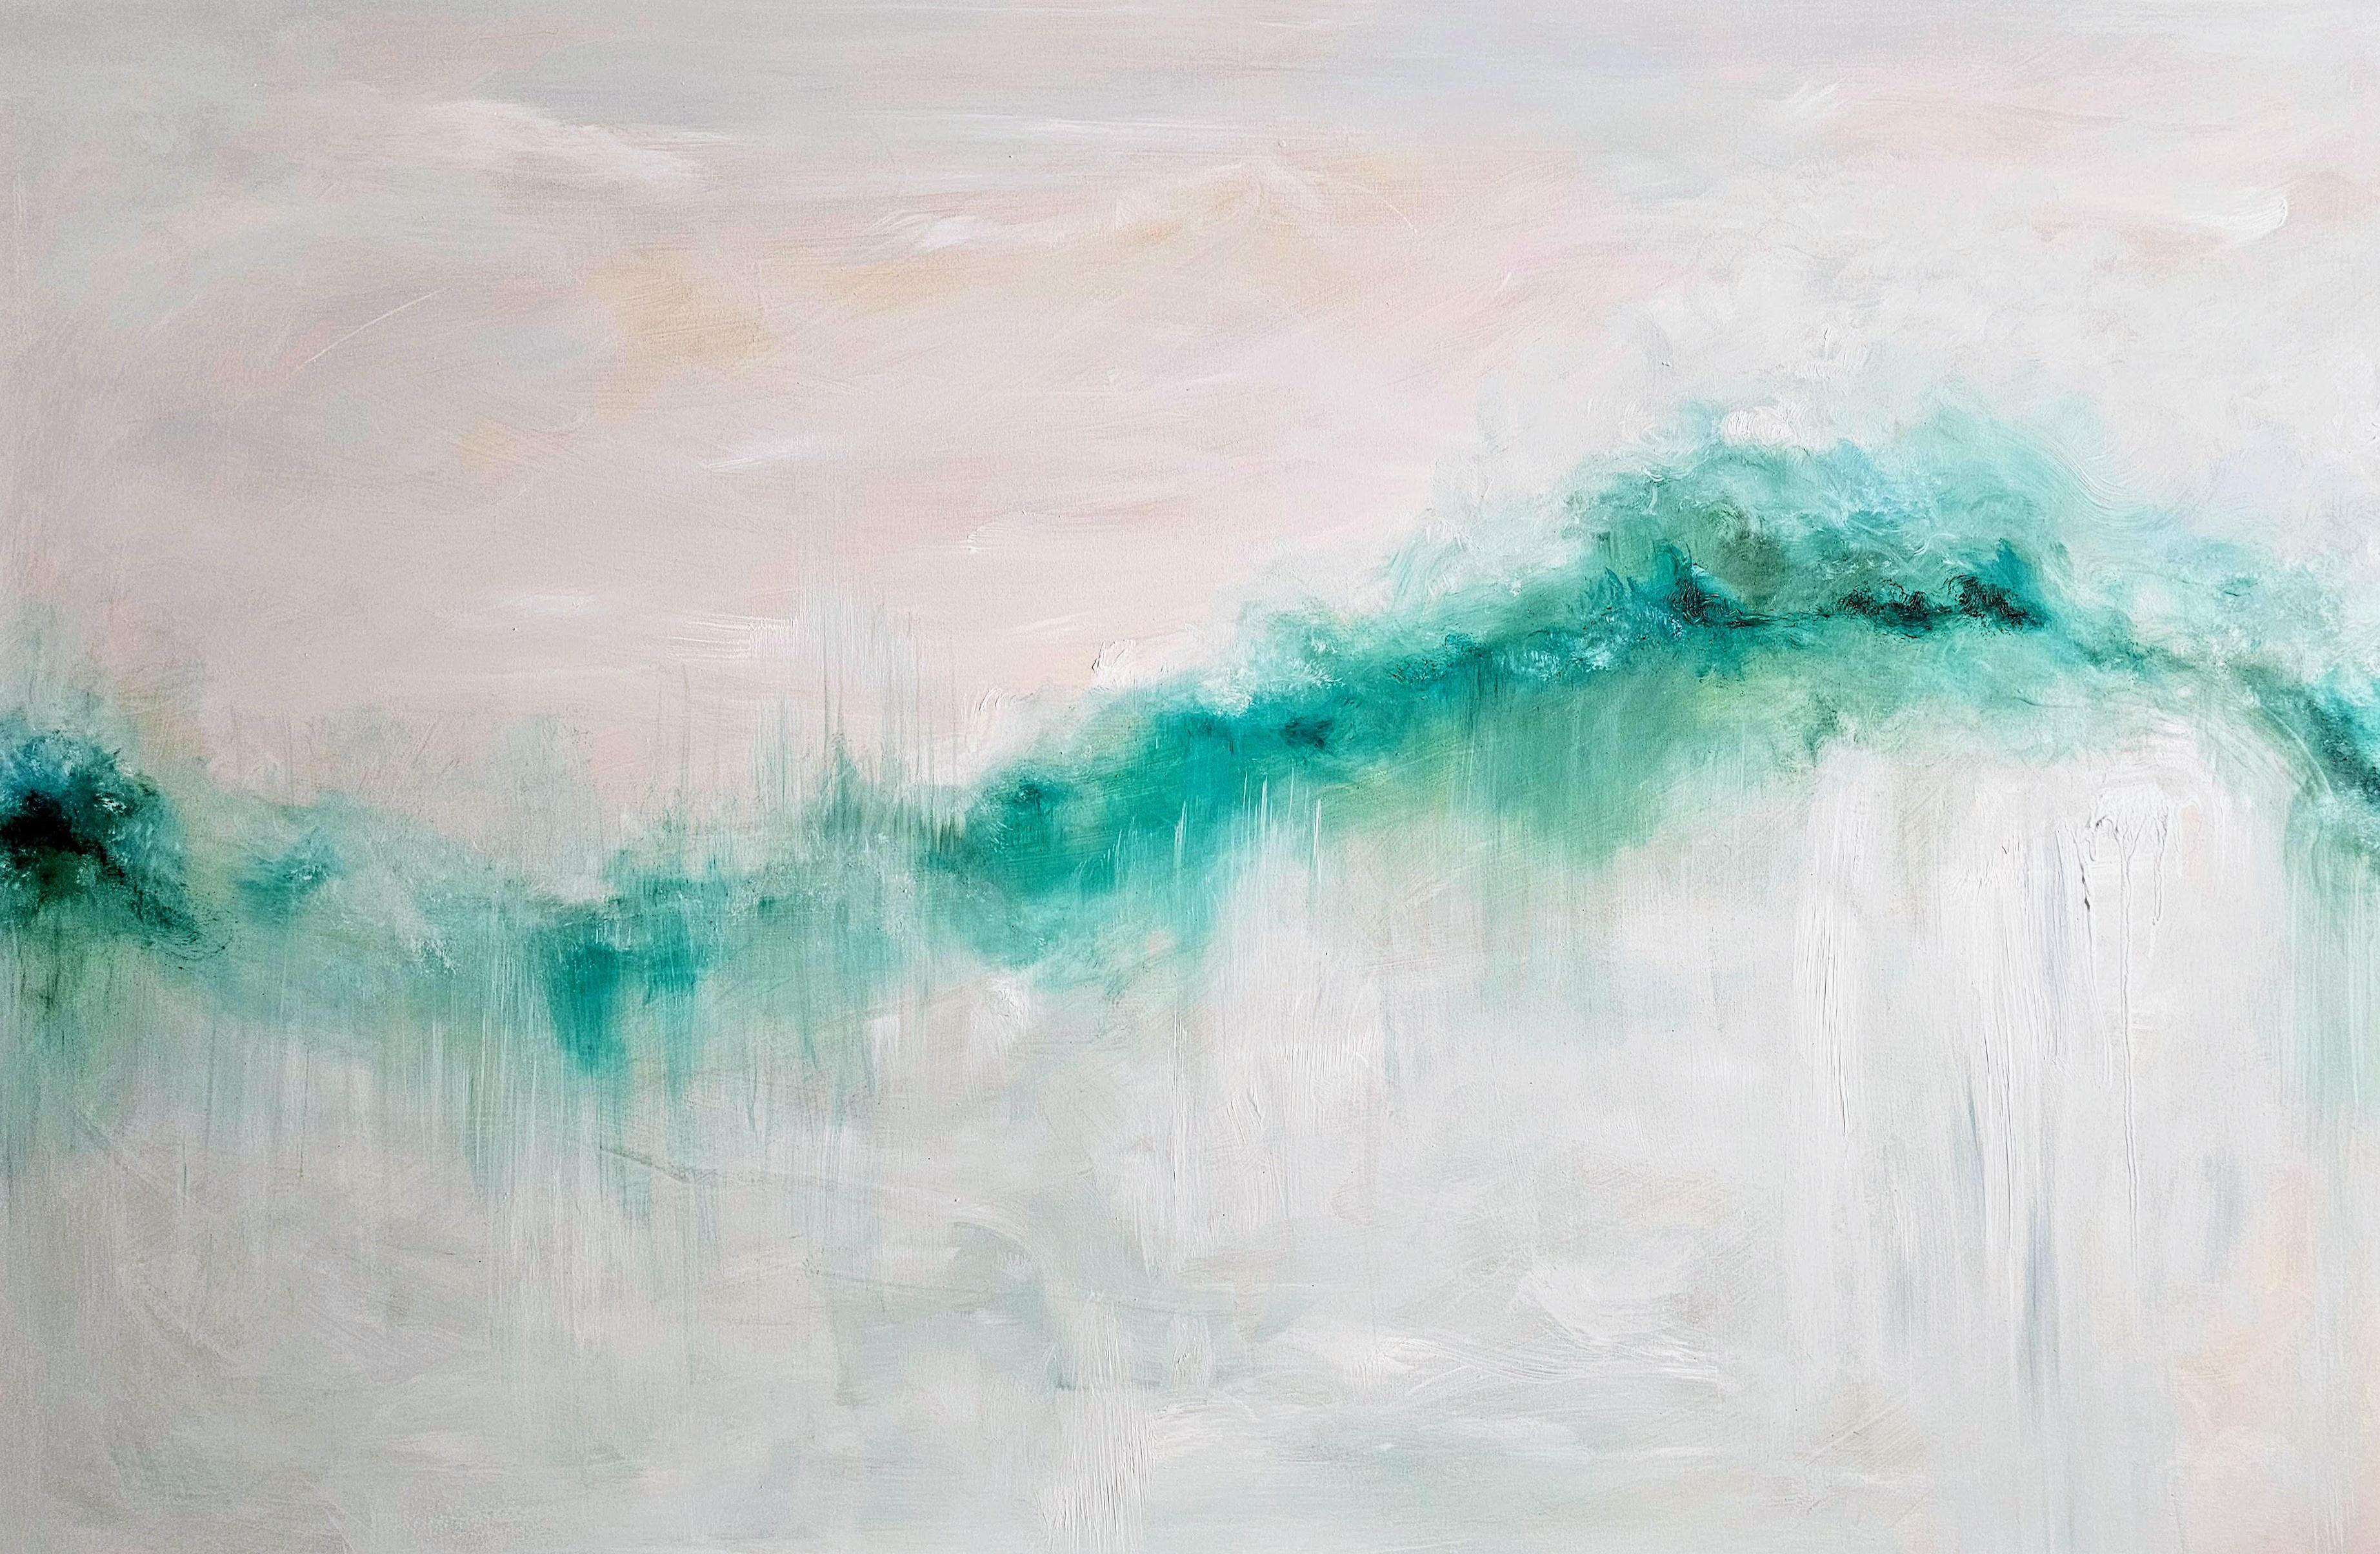 Jennifer L. Baker Landscape Painting - I dreamt of the sea - Large abstract seascape painting